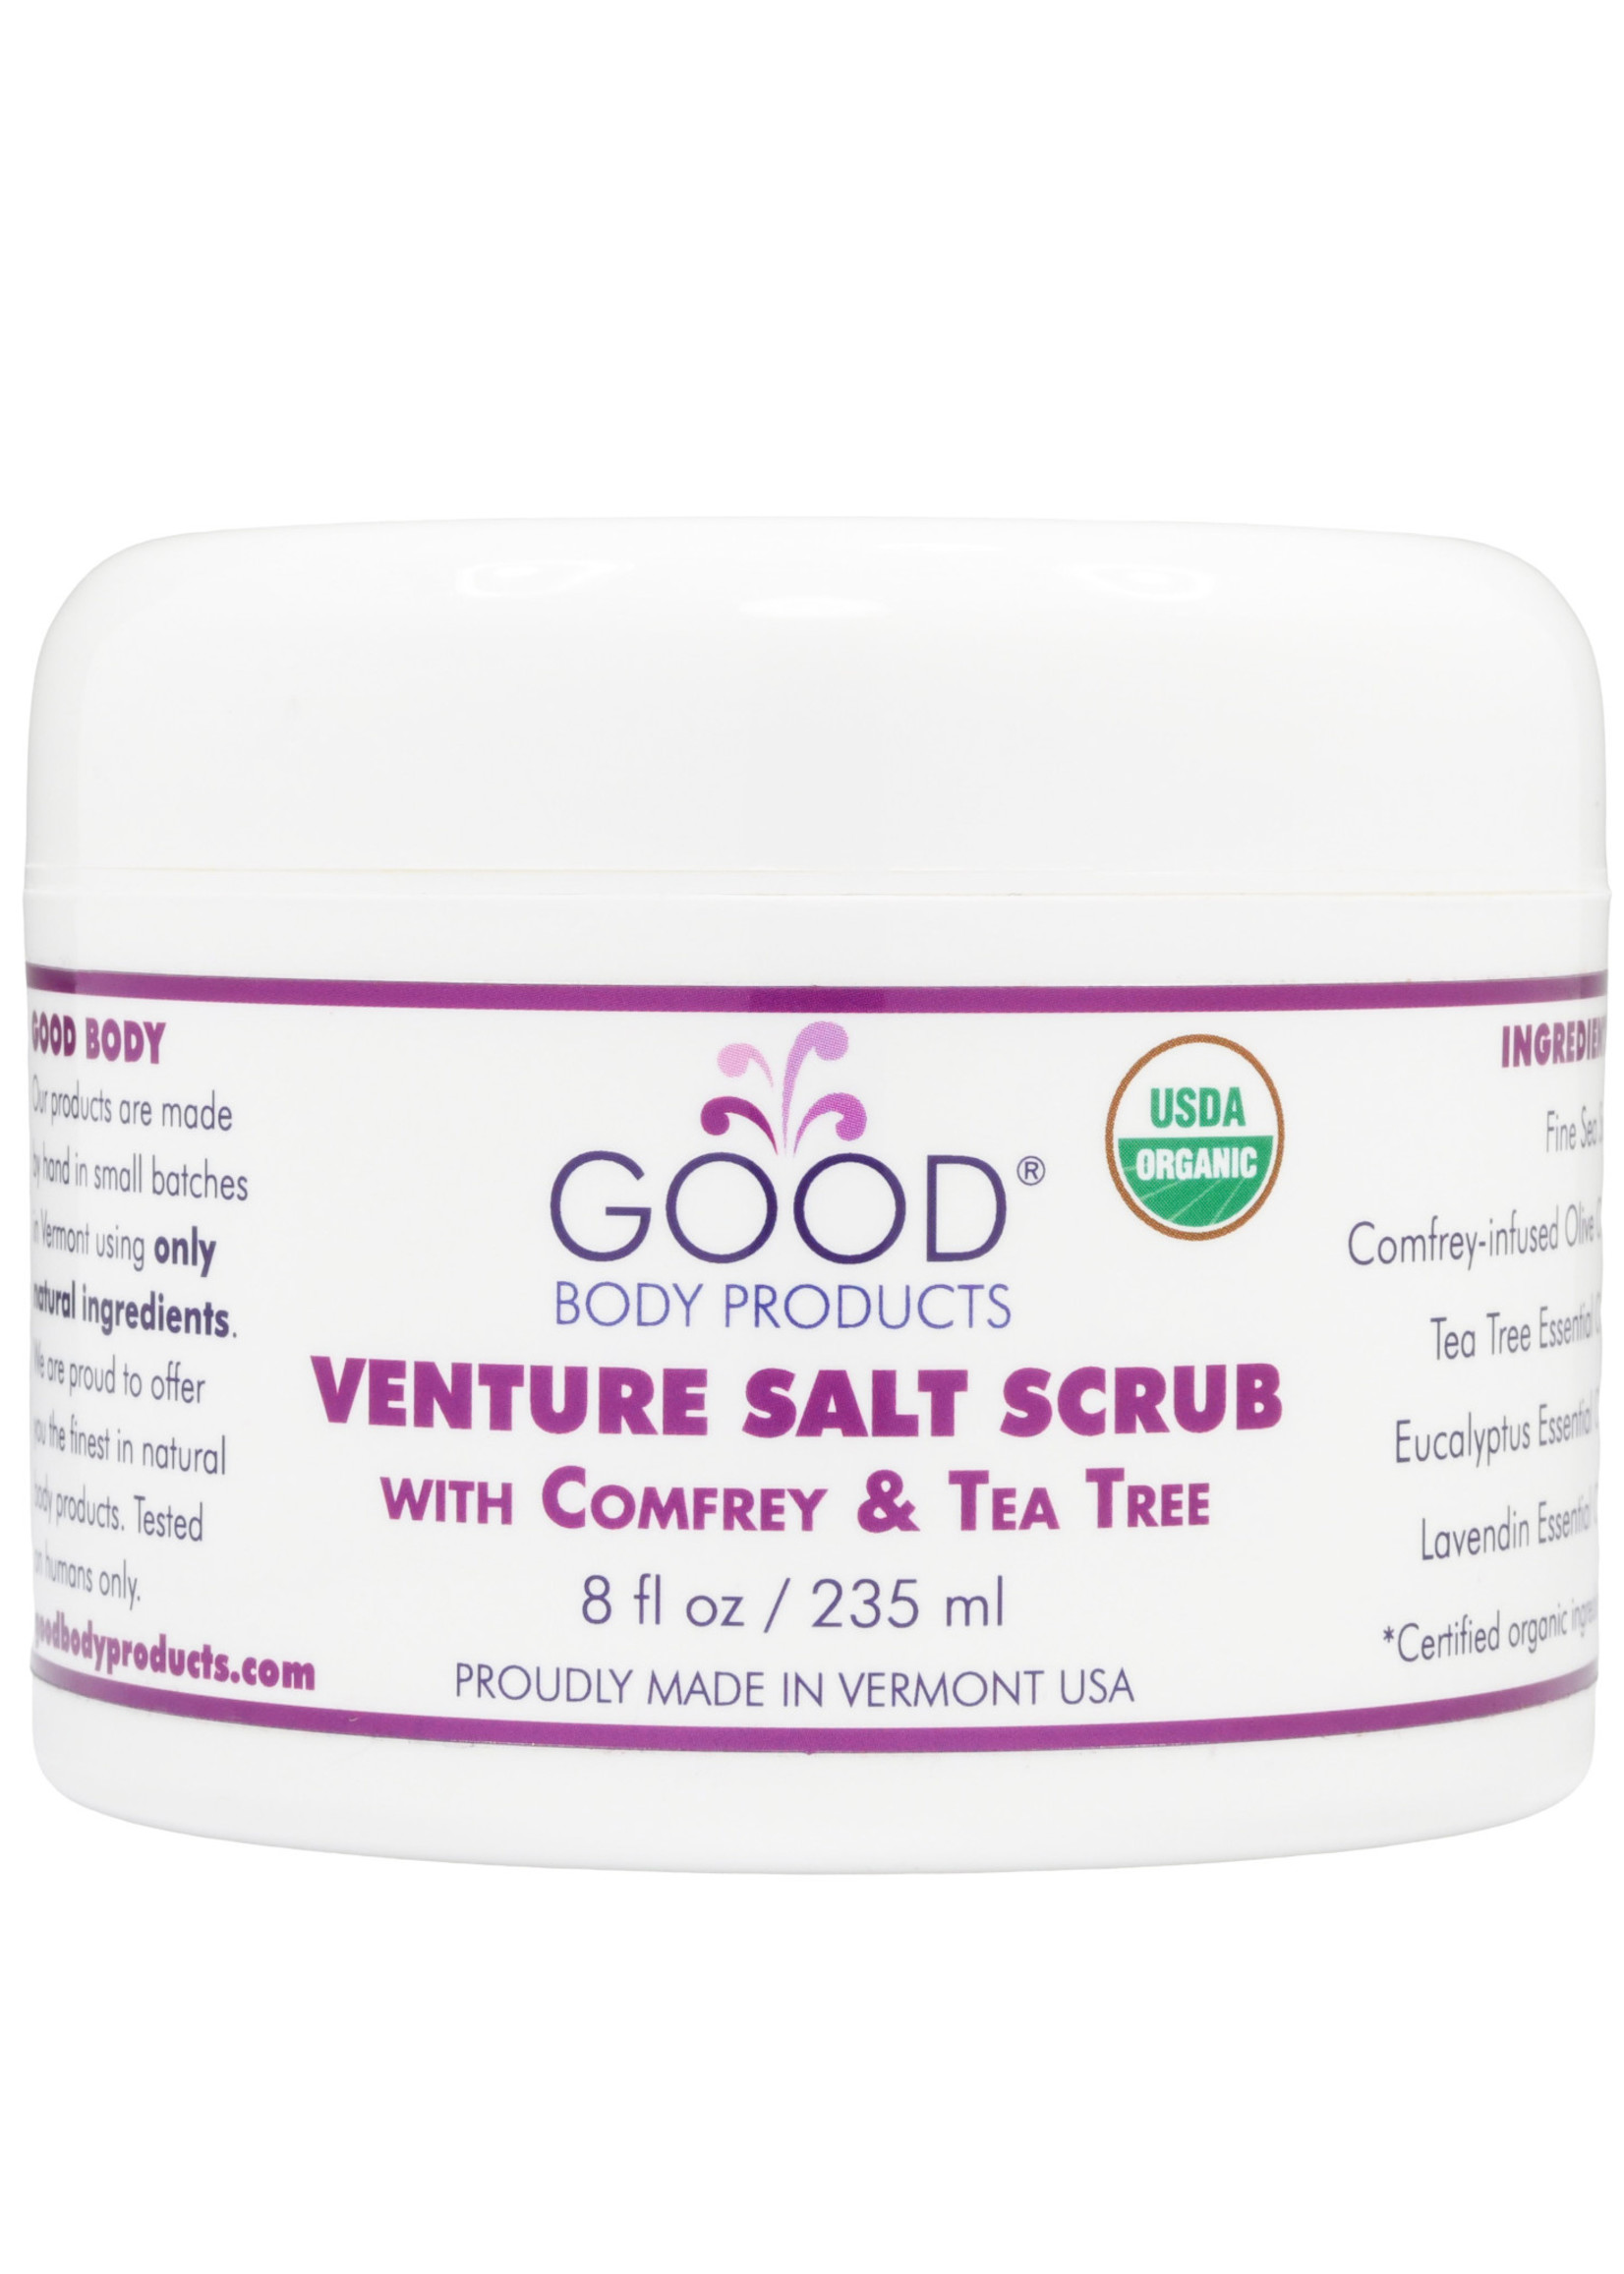 Good Body Products VENTURE SALT SCRUB with Comfrey and Tea Tree